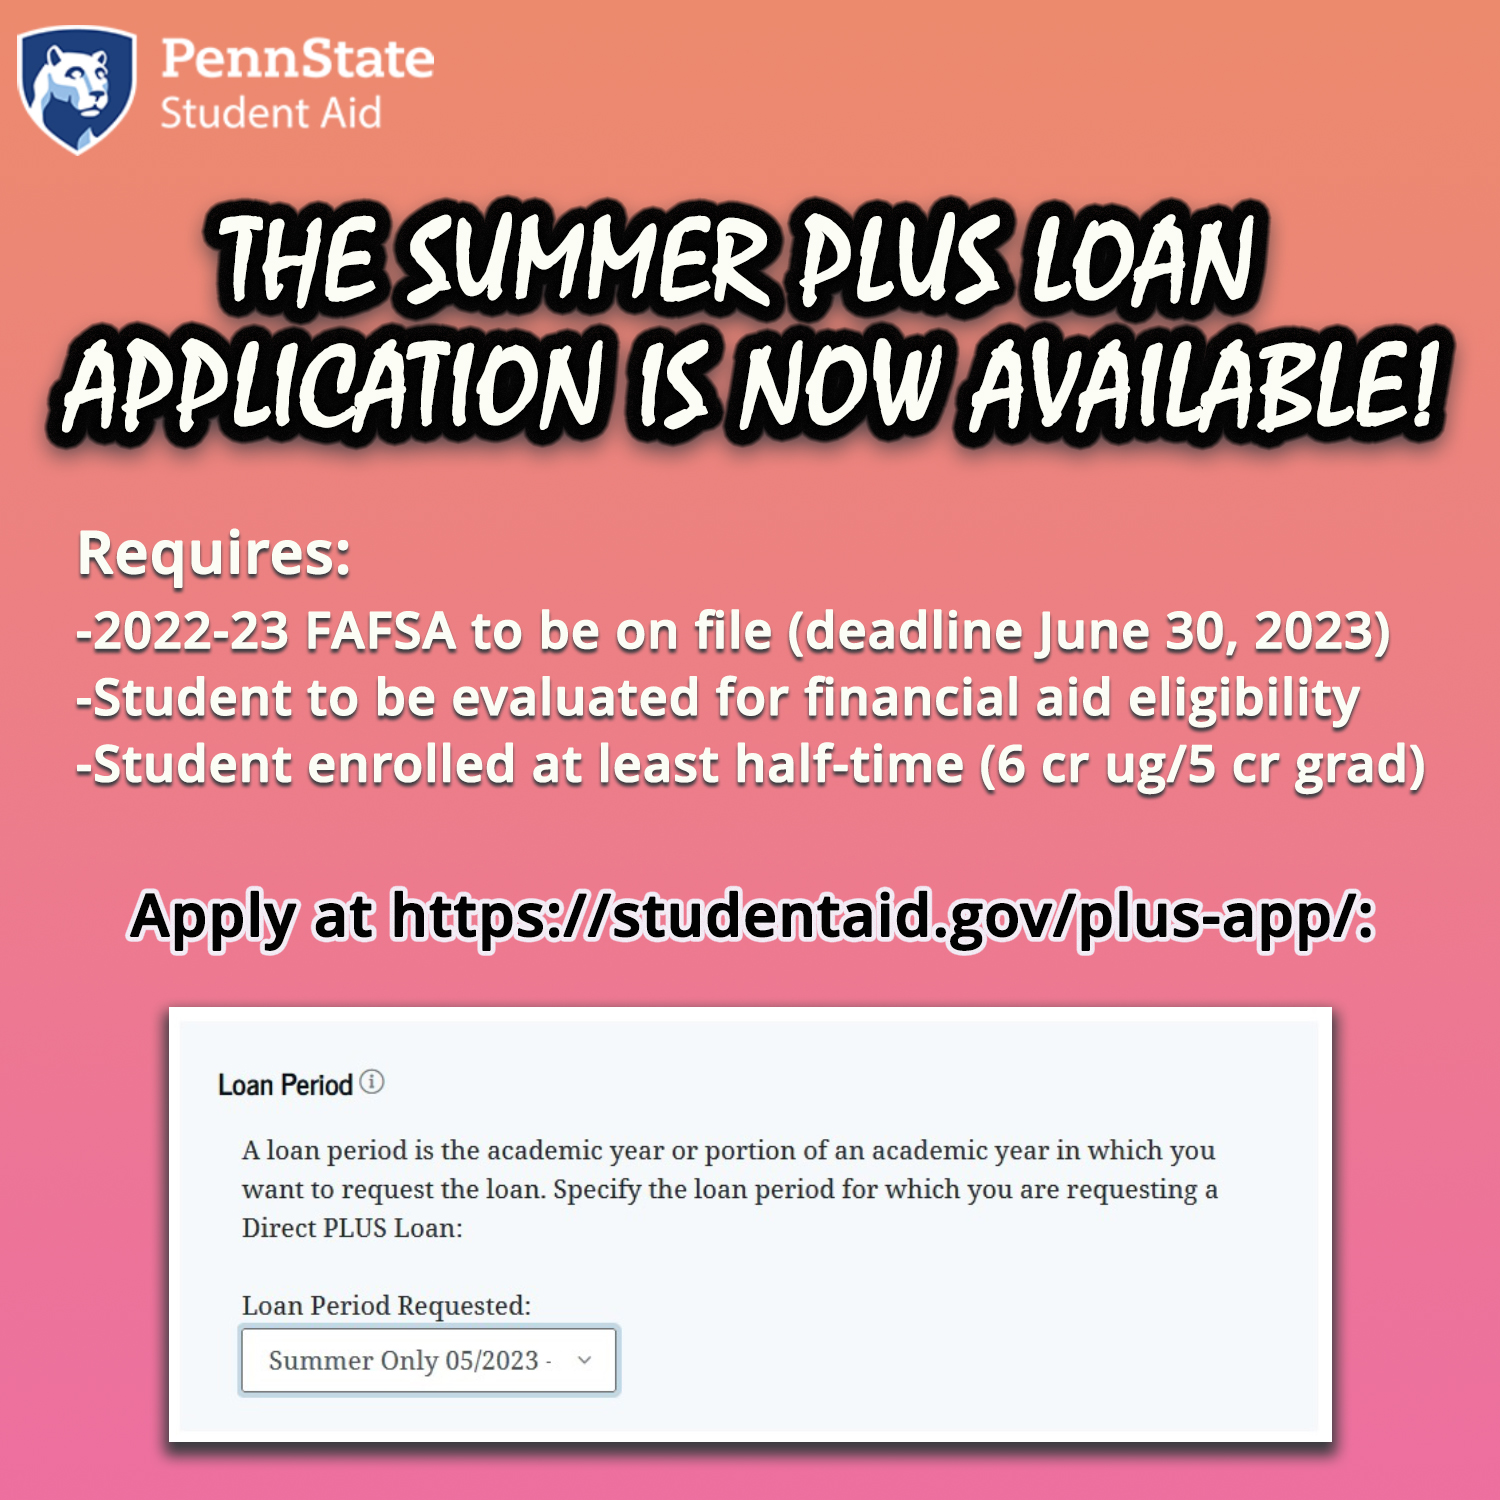 PLUS loan application showing 'Summer Only 05/2023'.